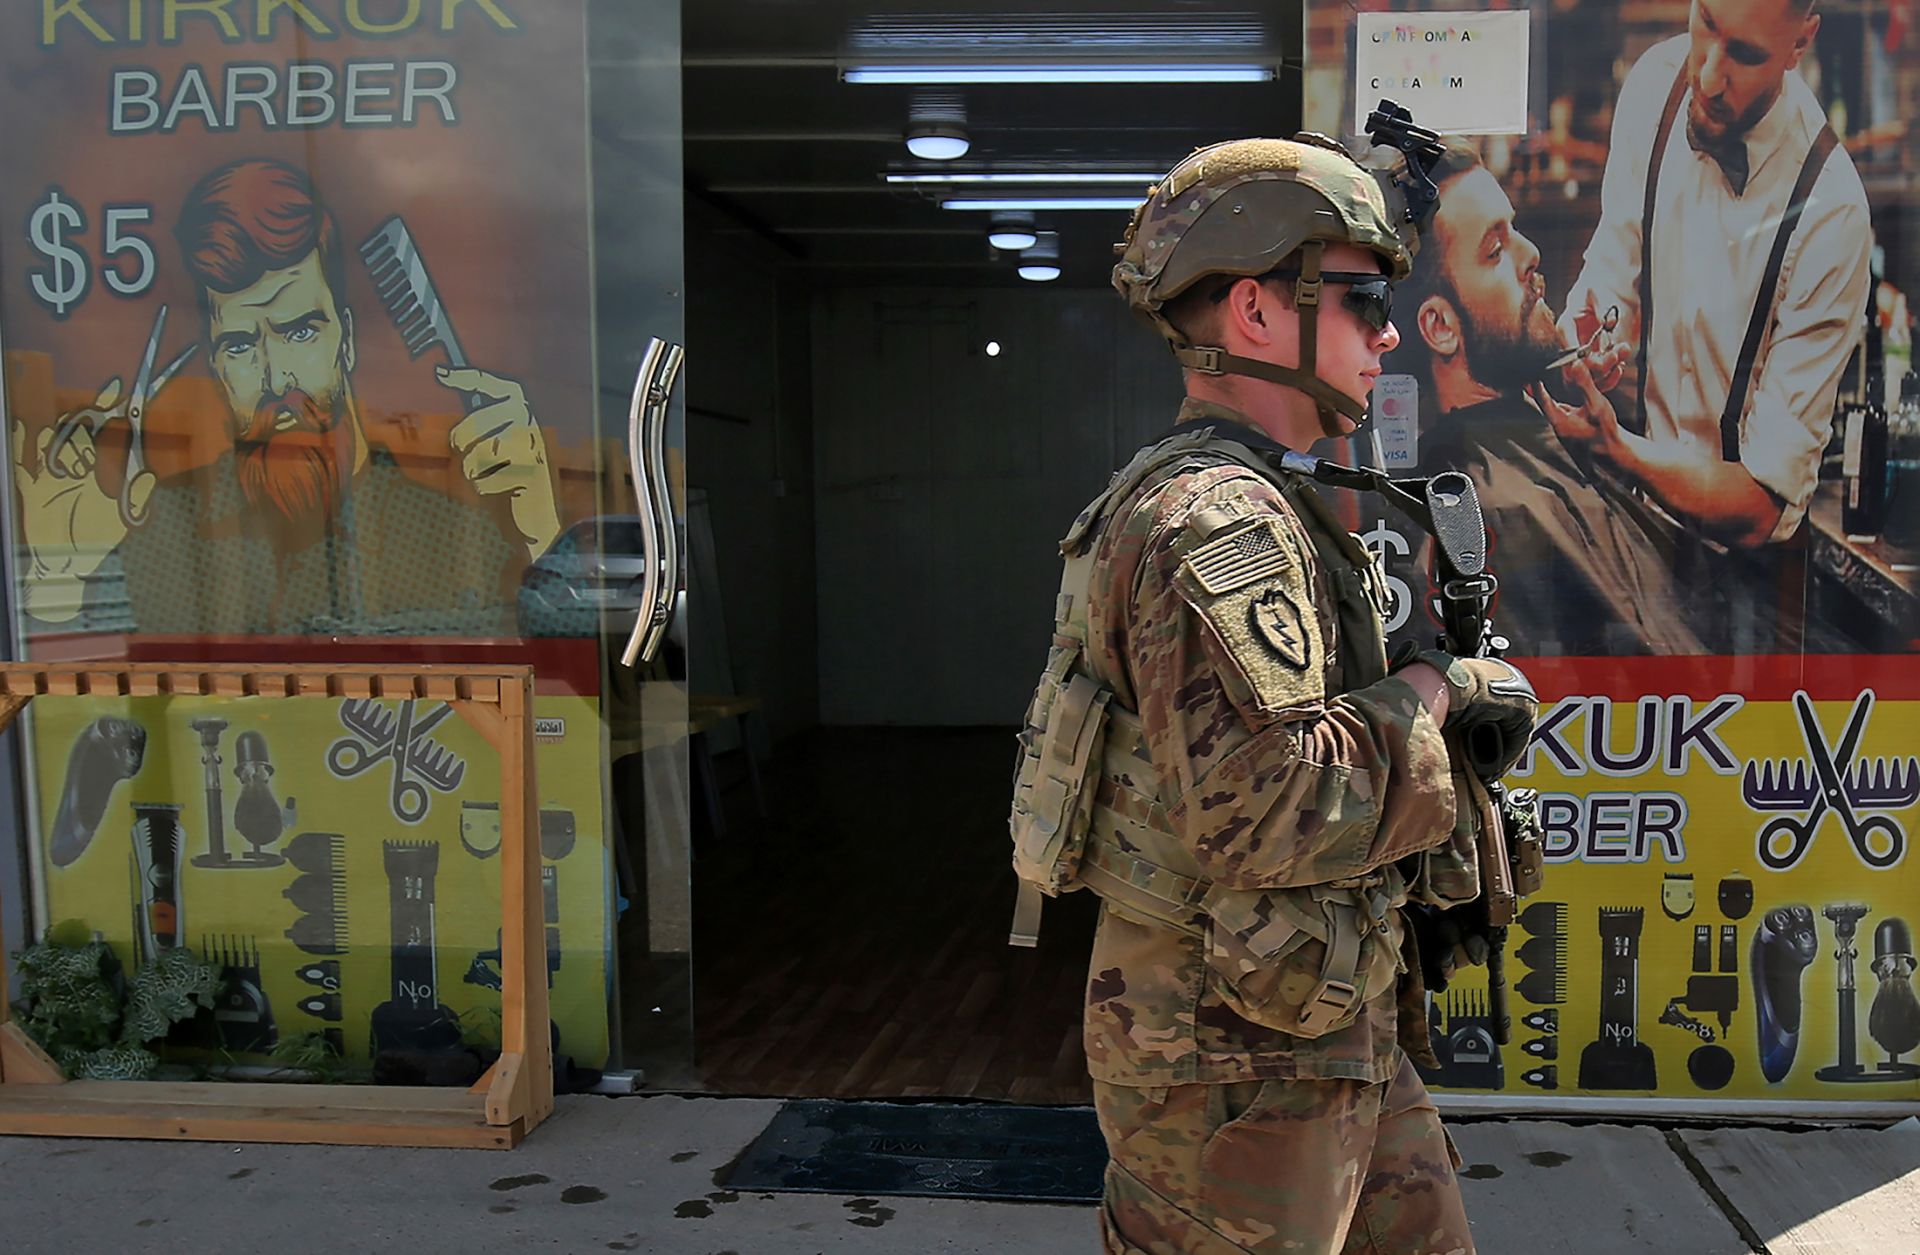 A U.S. soldier at the K1 Air Base northwest of Kirkuk in northern Iraq before a planned U.S. pullout on March 29, 2020.